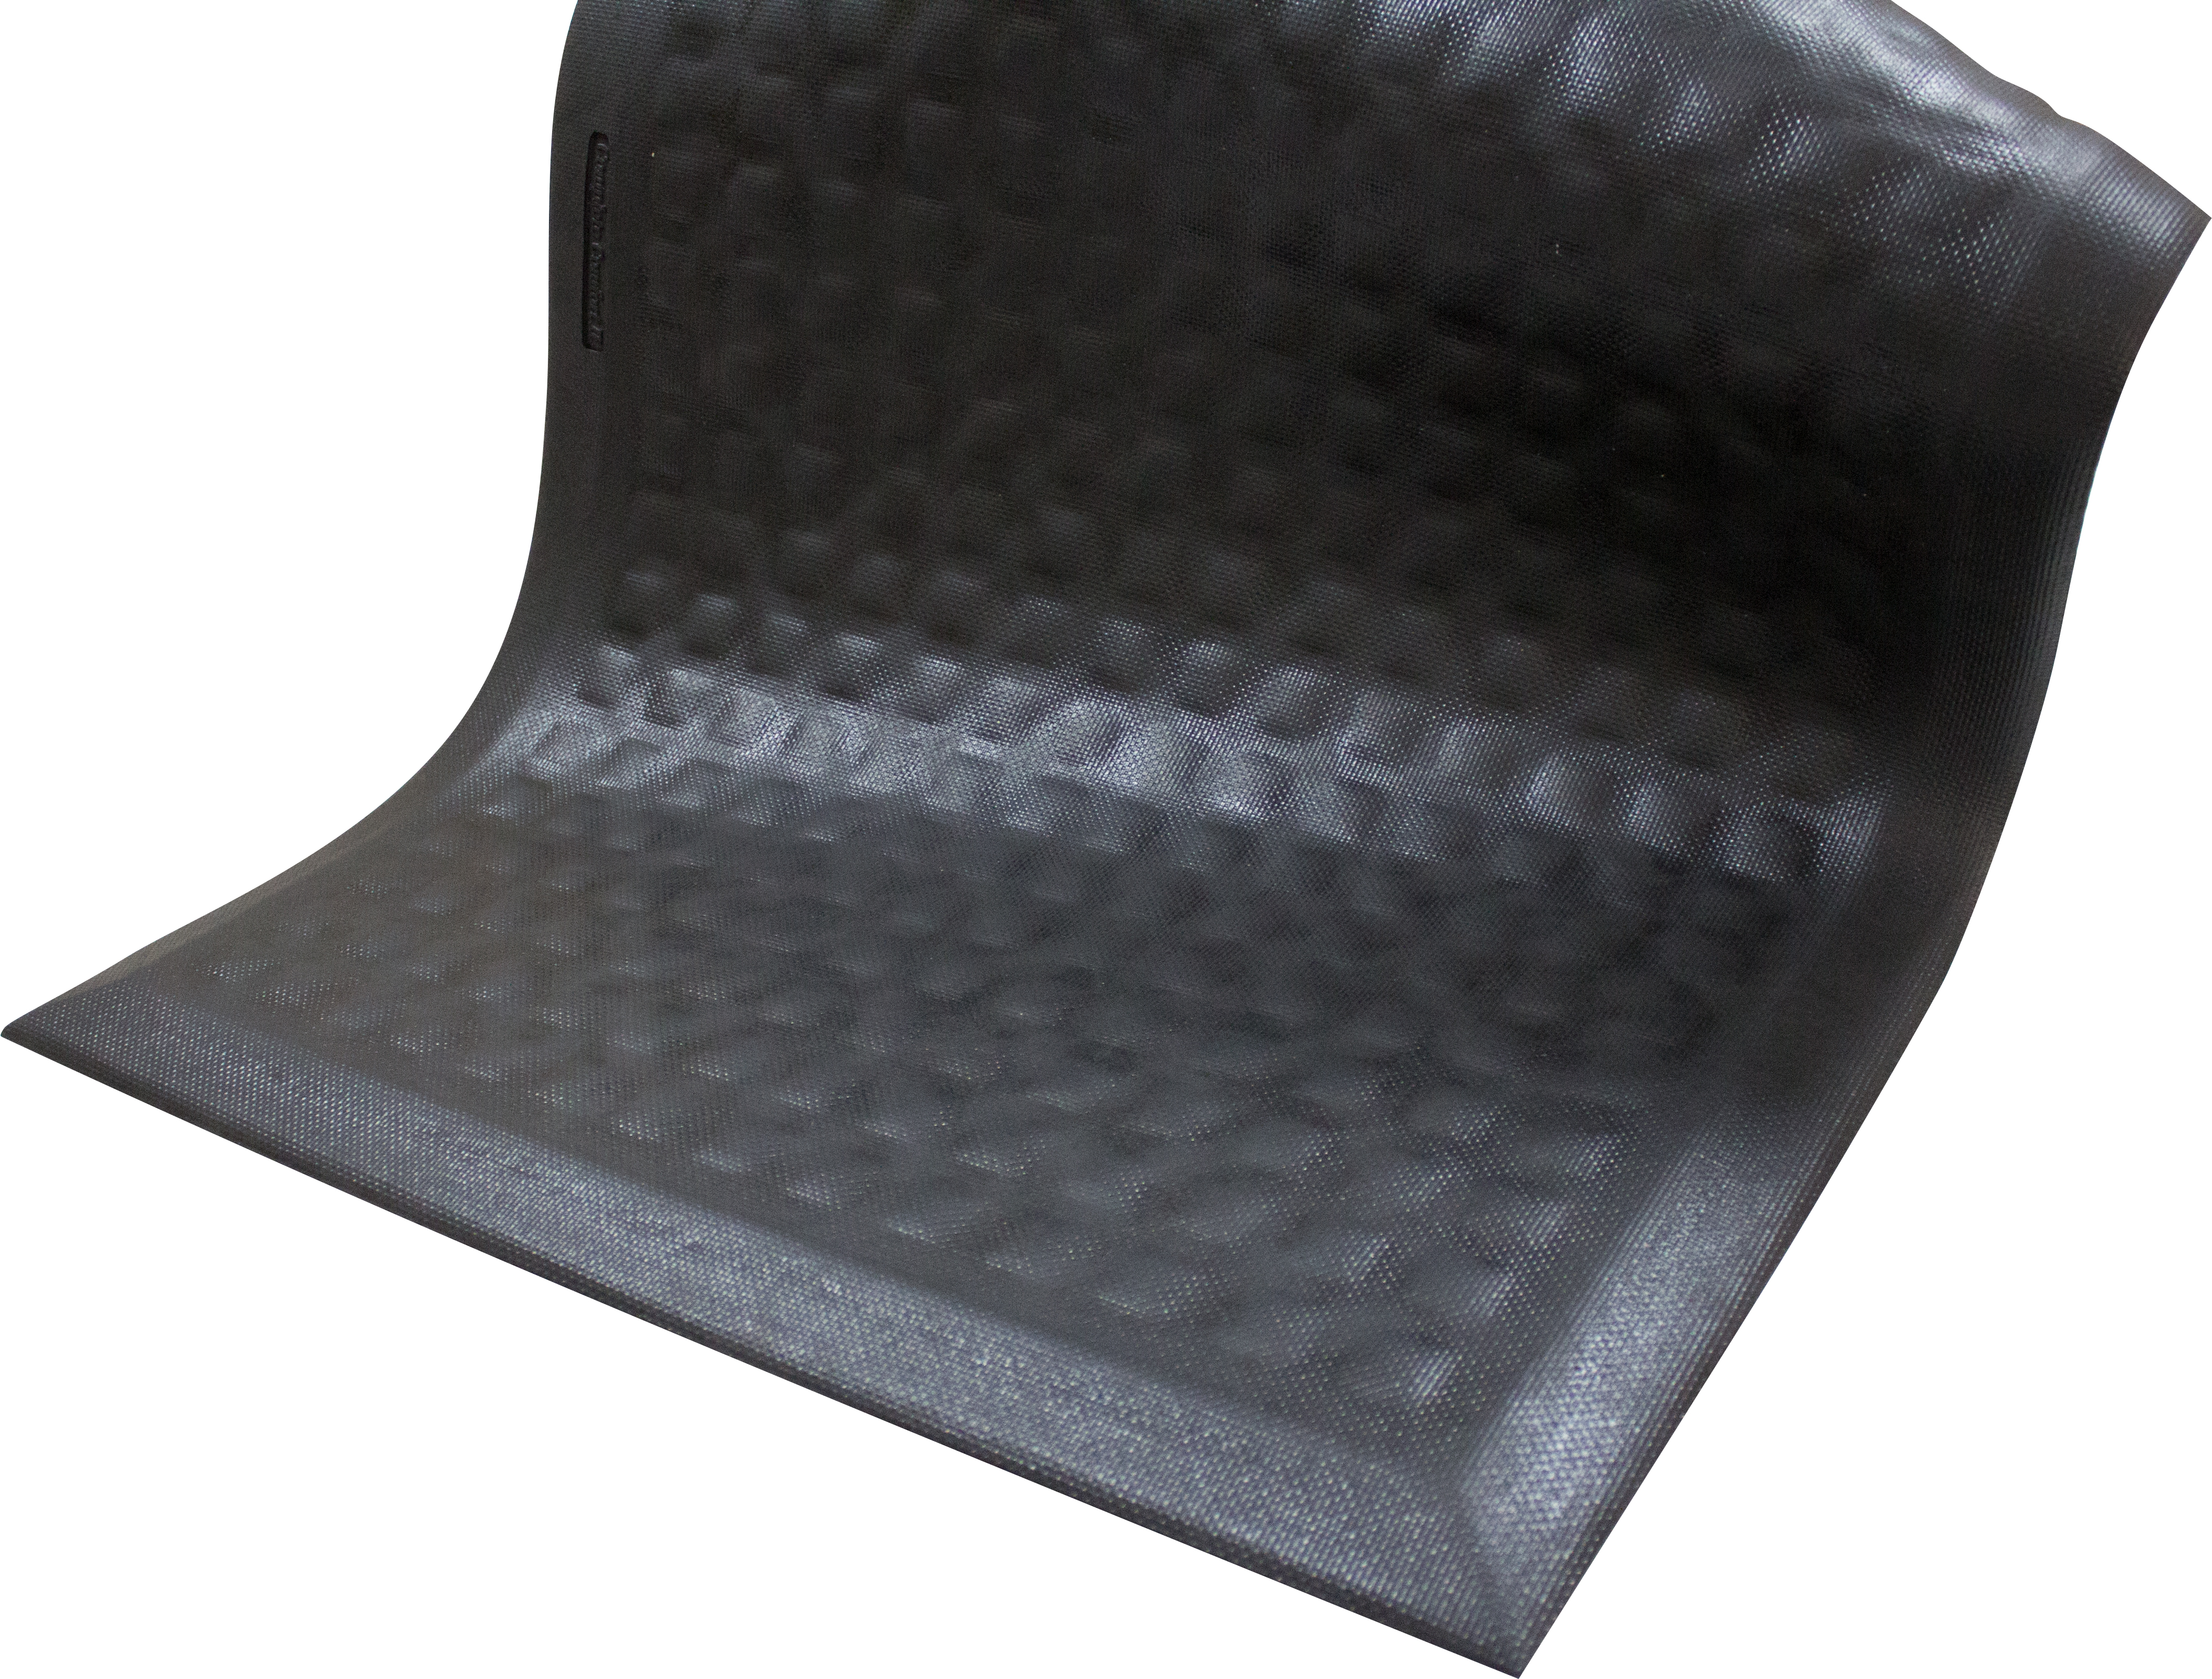 ESD Anti Fatigue Mats Nitrile Rubber top surface Complete Comfort II 90 x 150 cm Without Earth Grounding Plug Connection 812-5594-9015